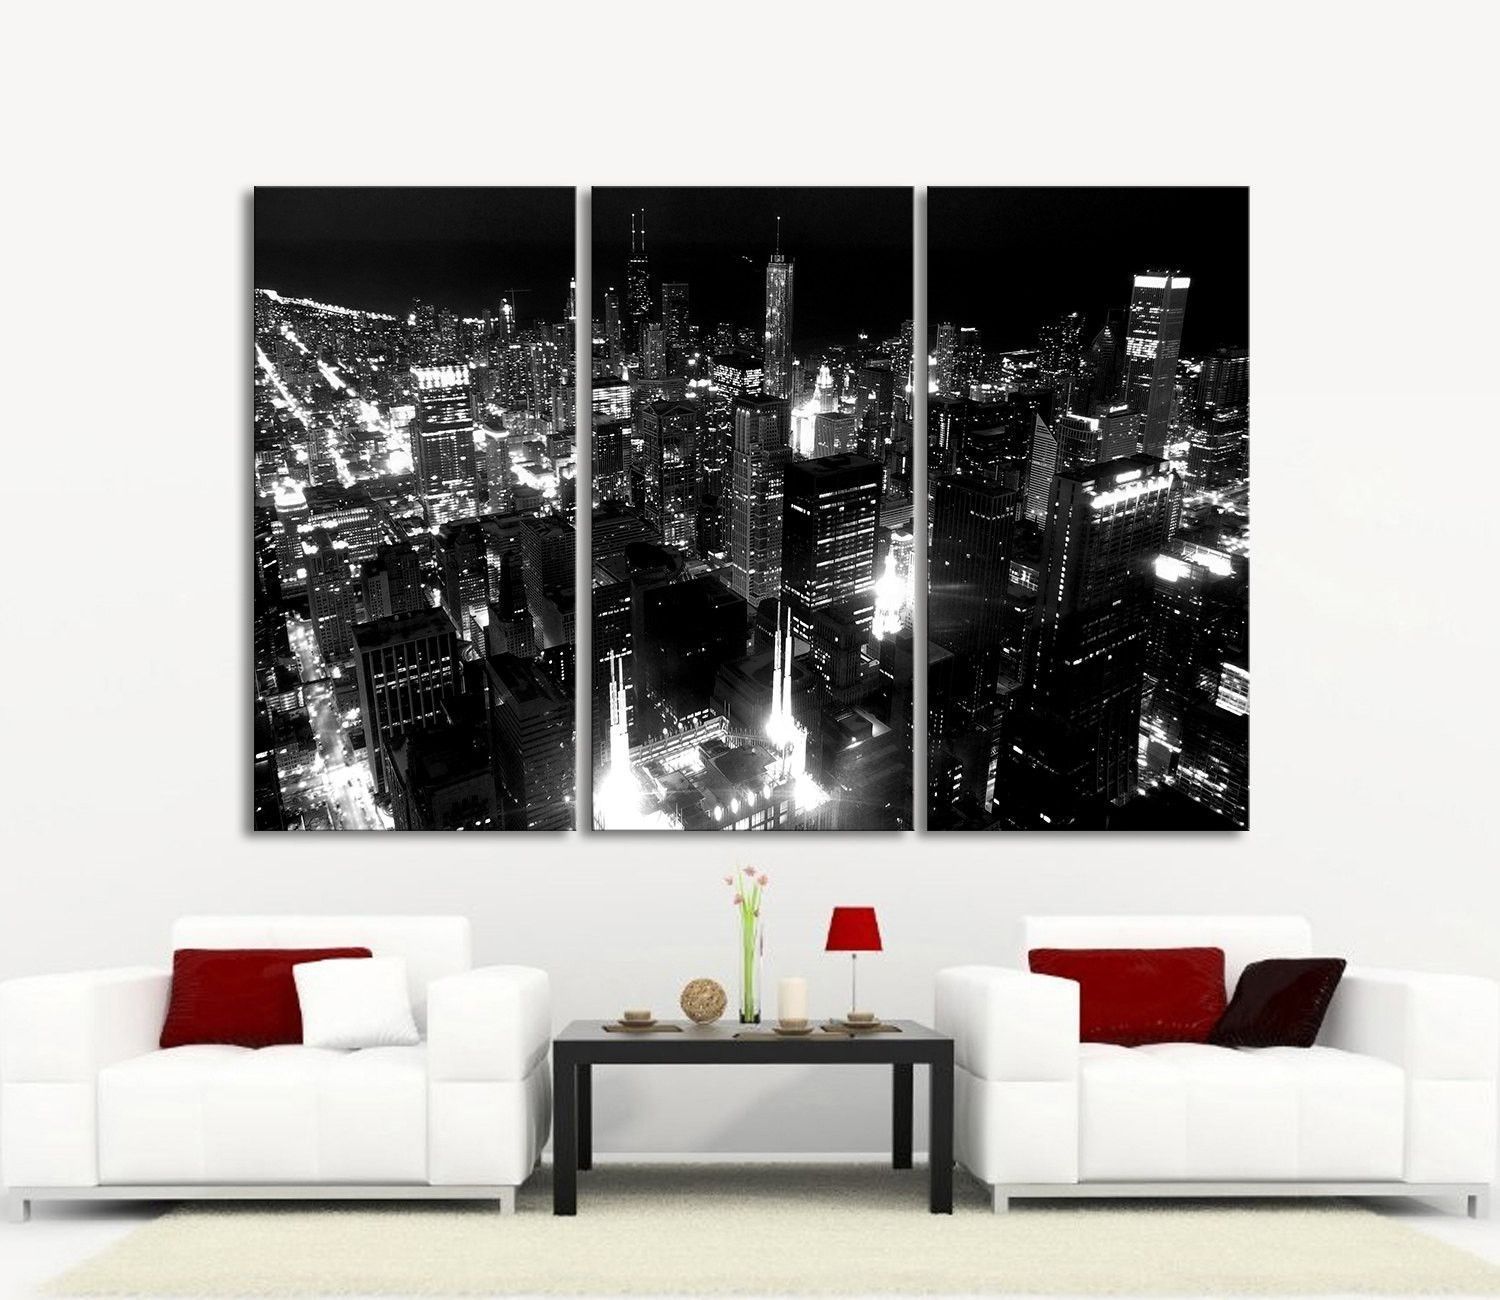 Large Wall Art Canvas Print Chicago City Skyline At Night – 3 Panel Regarding Current Chicago Wall Art (View 6 of 15)